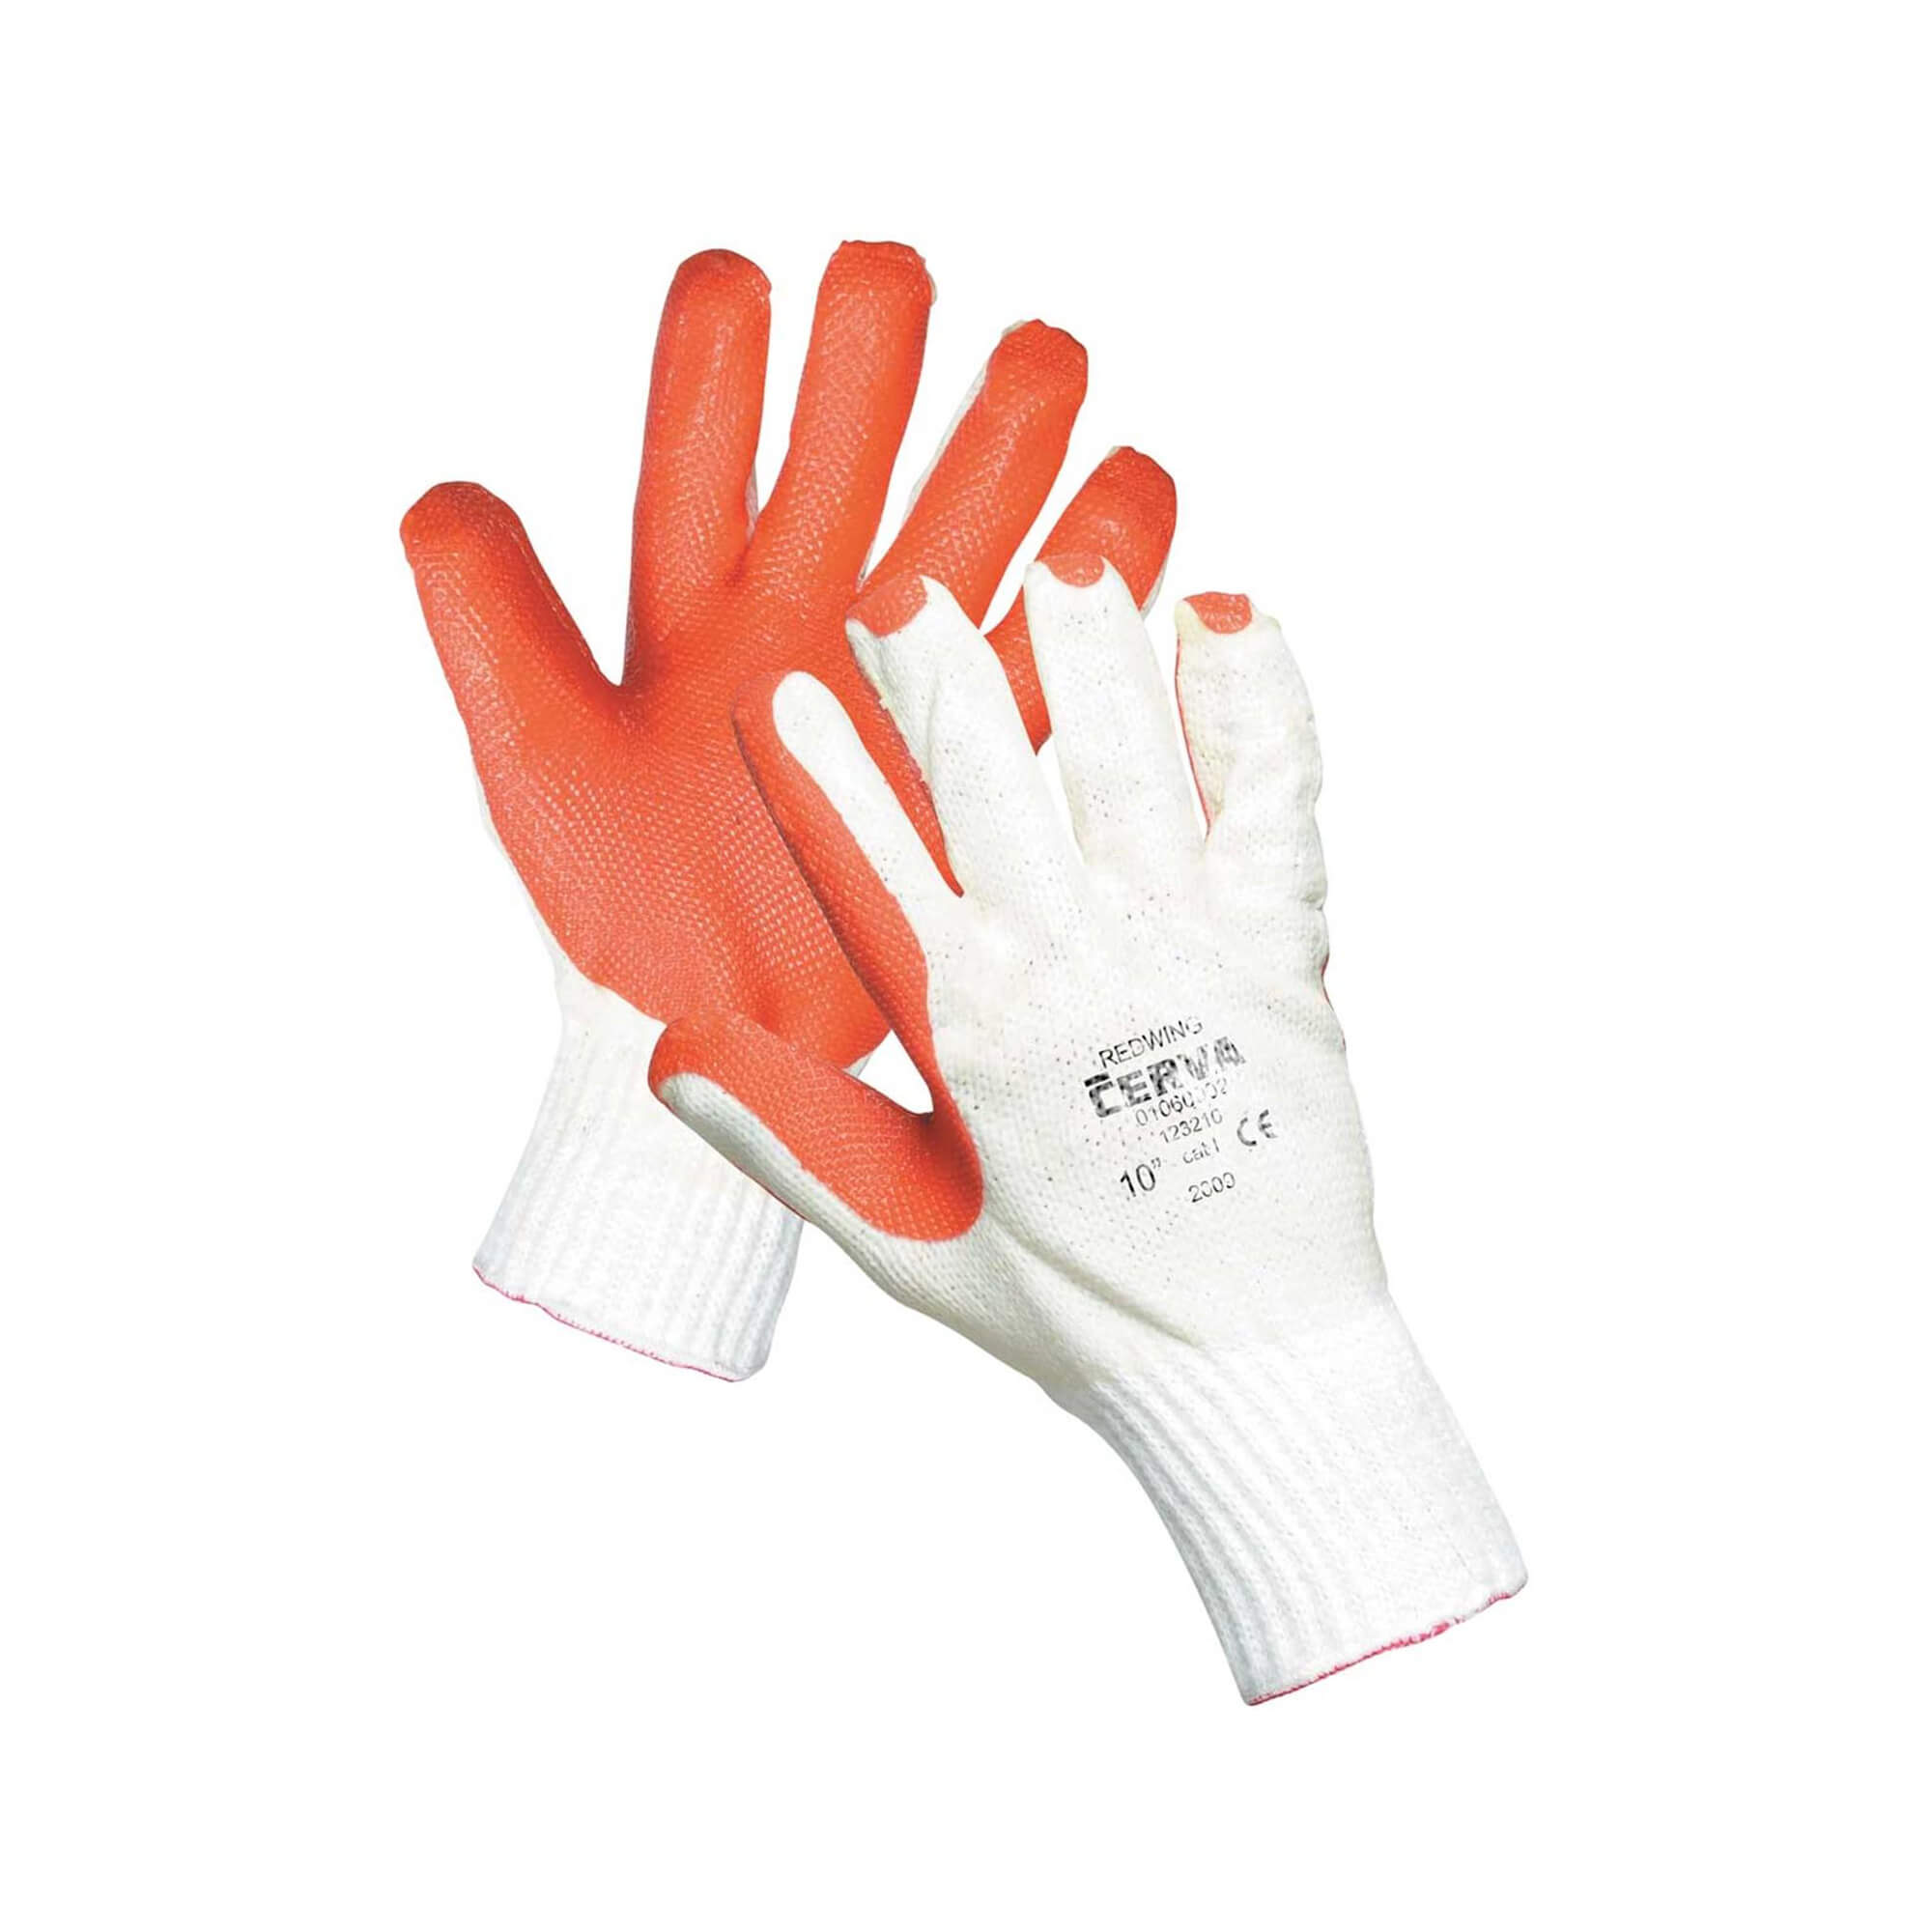 Protective work gloves Redwing Adria